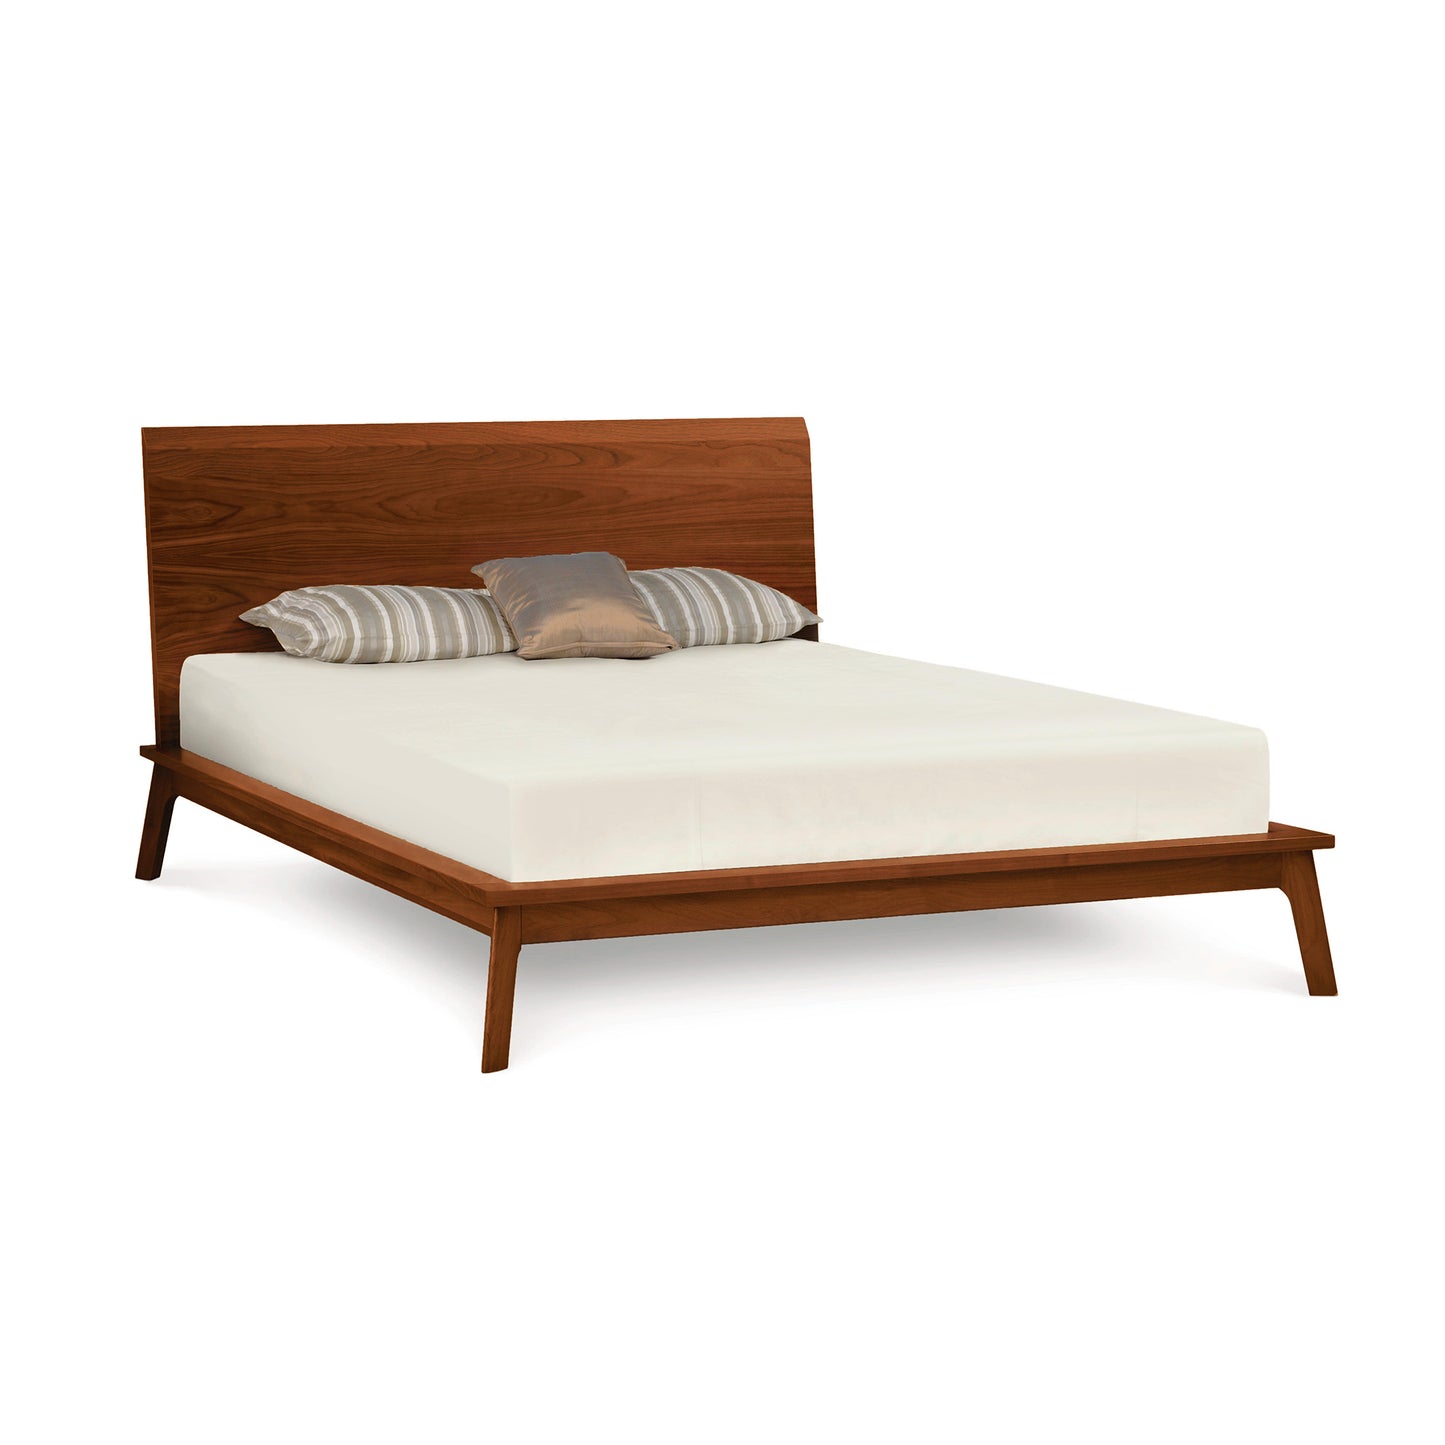 A modern Copeland Furniture Catalina Cherry Platform Bed frame with a headboard, supporting a white mattress with two striped and one solid colored pillow.